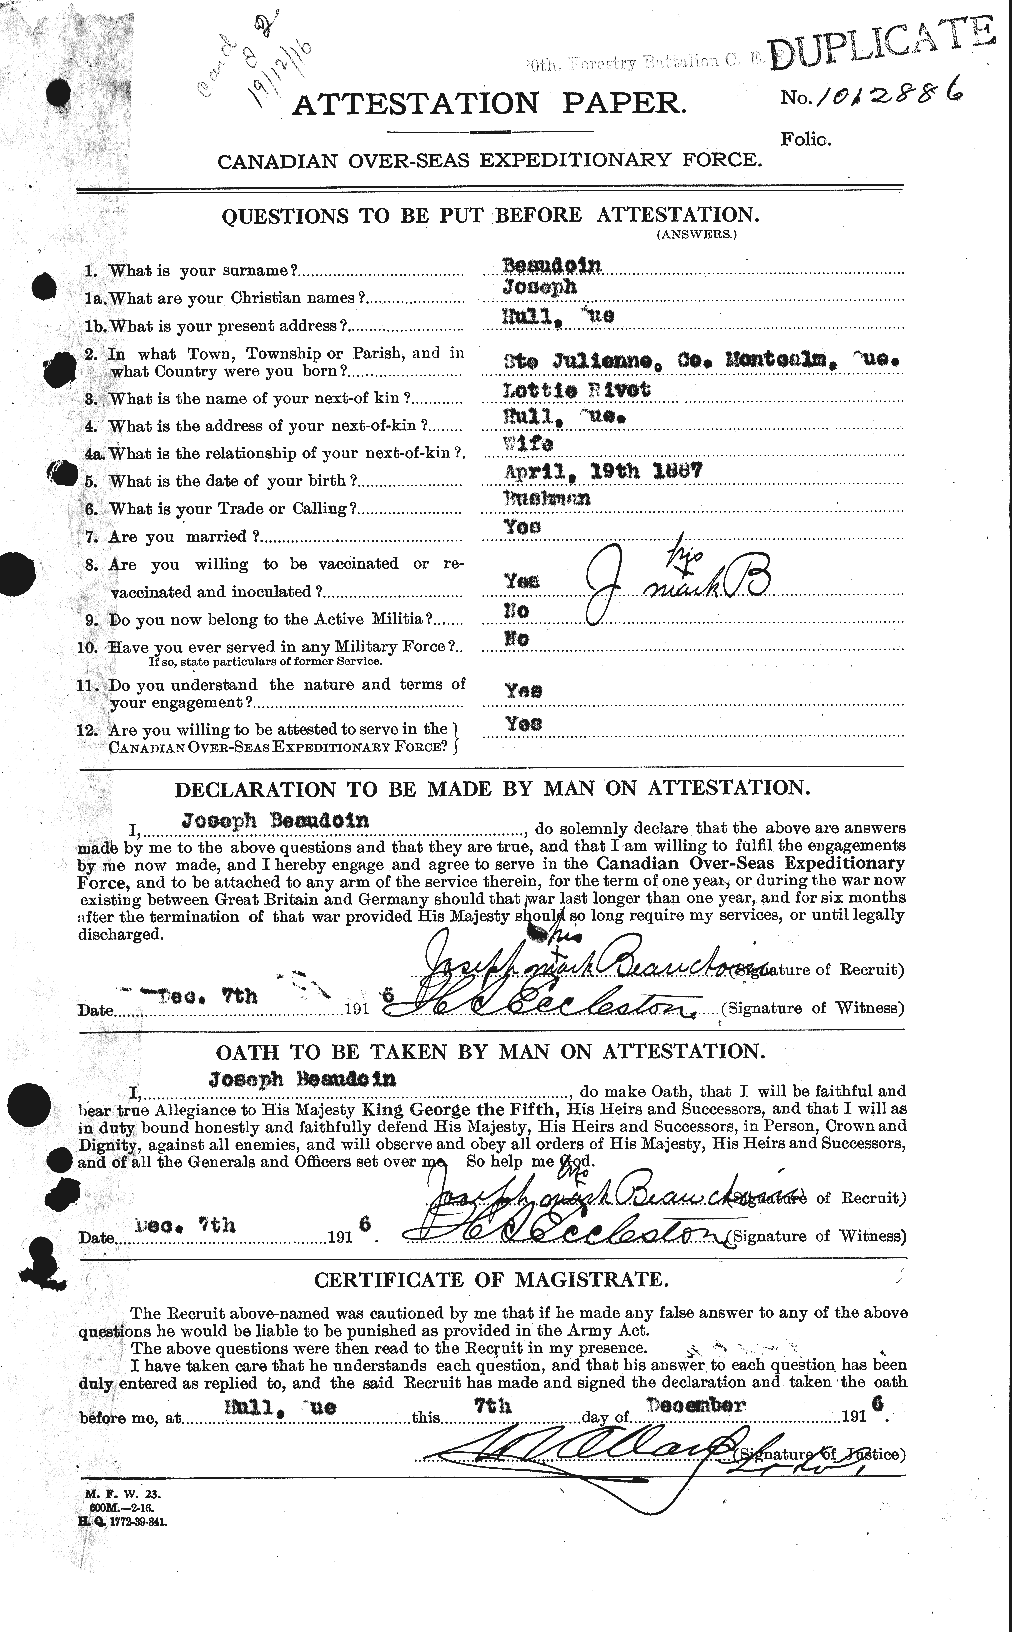 Personnel Records of the First World War - CEF 231252a